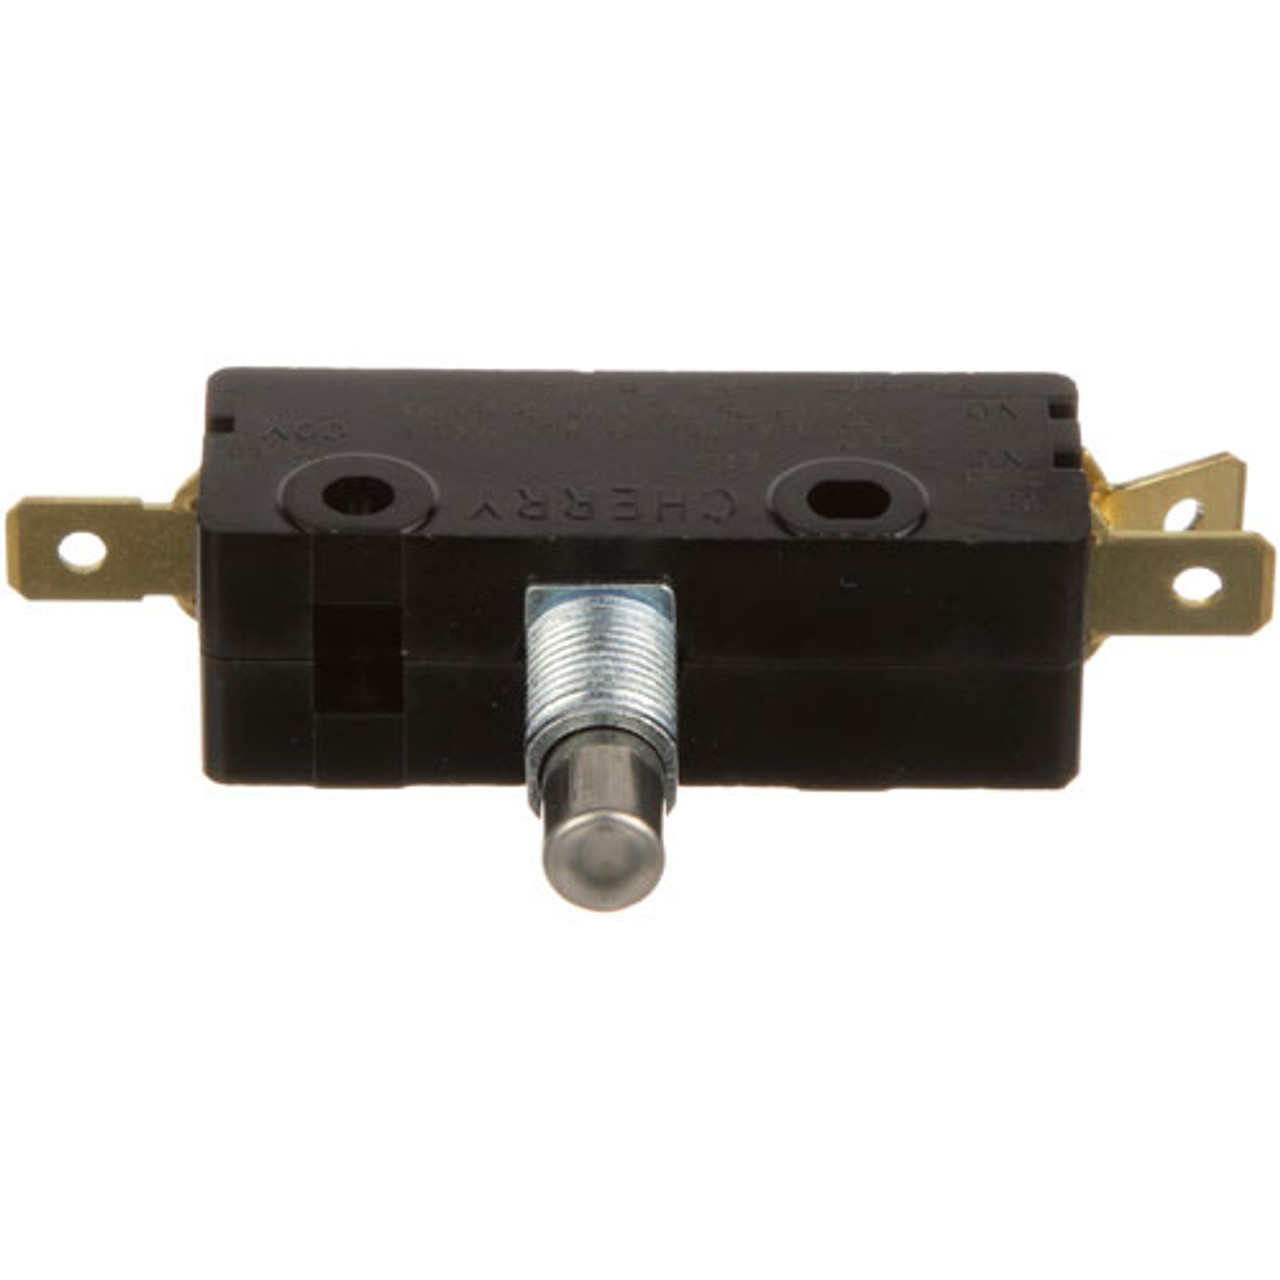 Switch - Replacement Part For Southbend 6405